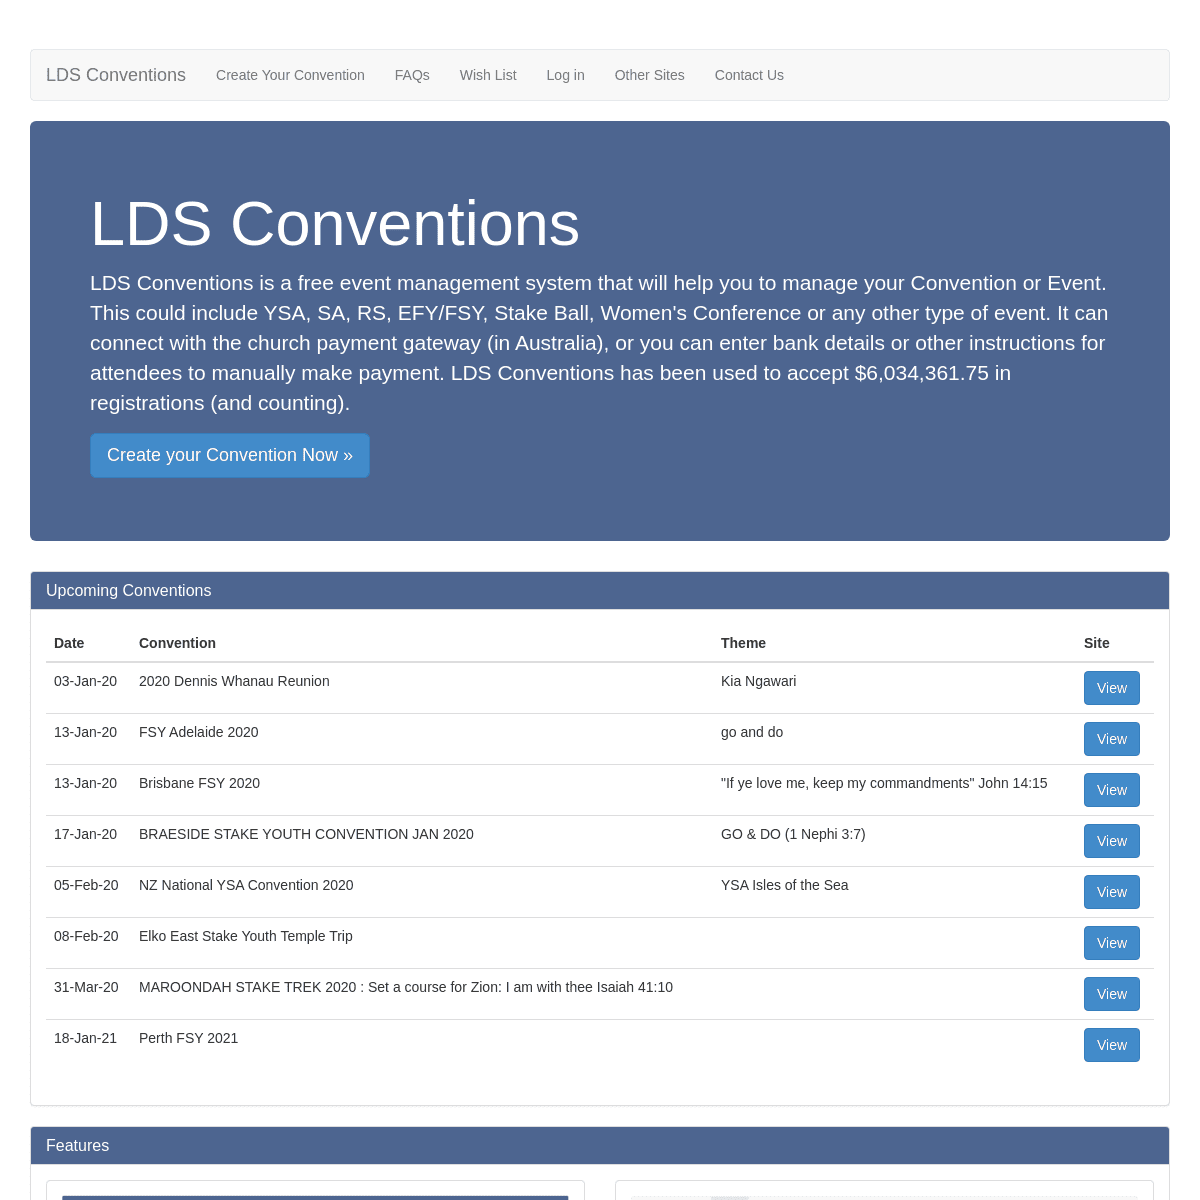 A complete backup of ldsconventions.com